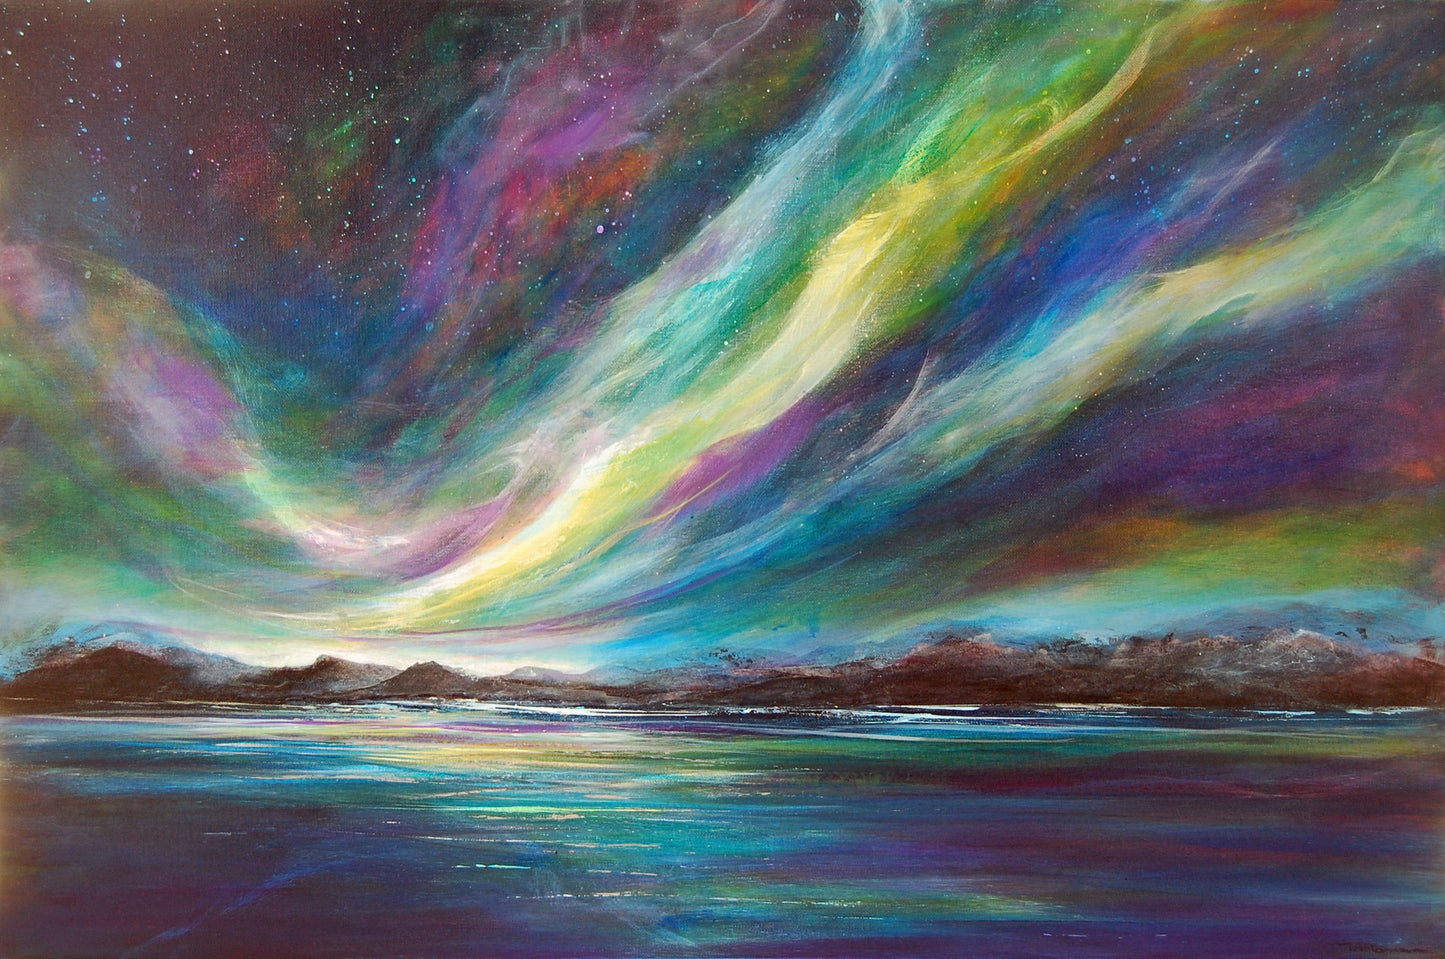 Dancing Lights - Original Abstract Landscape Painting